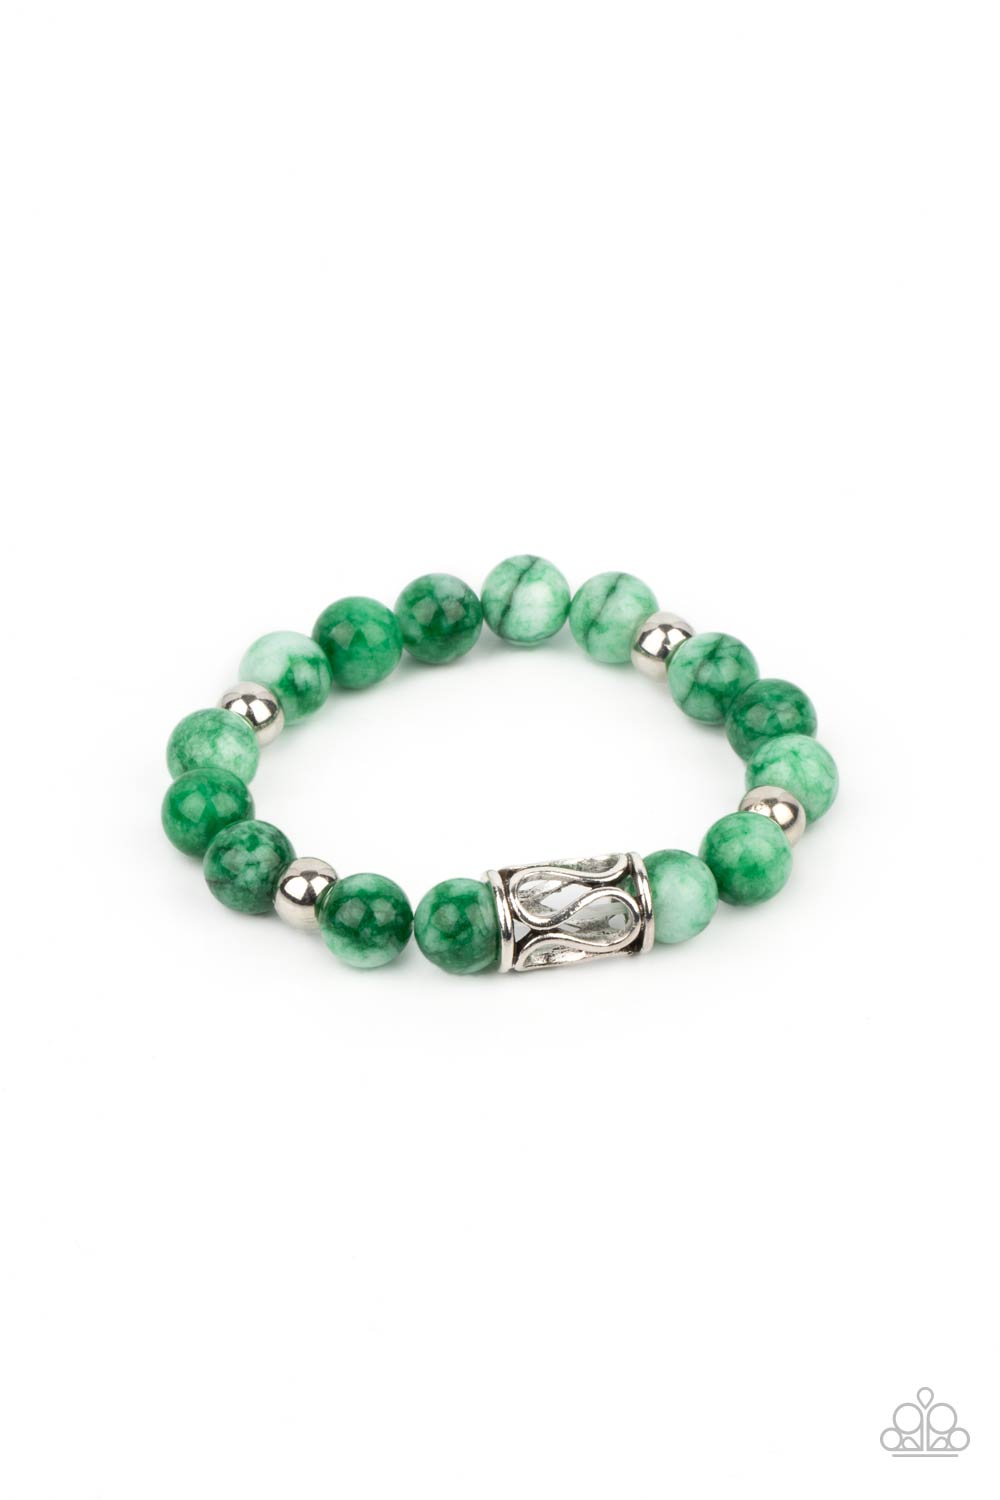 Soothes The Soul - Green bracelet